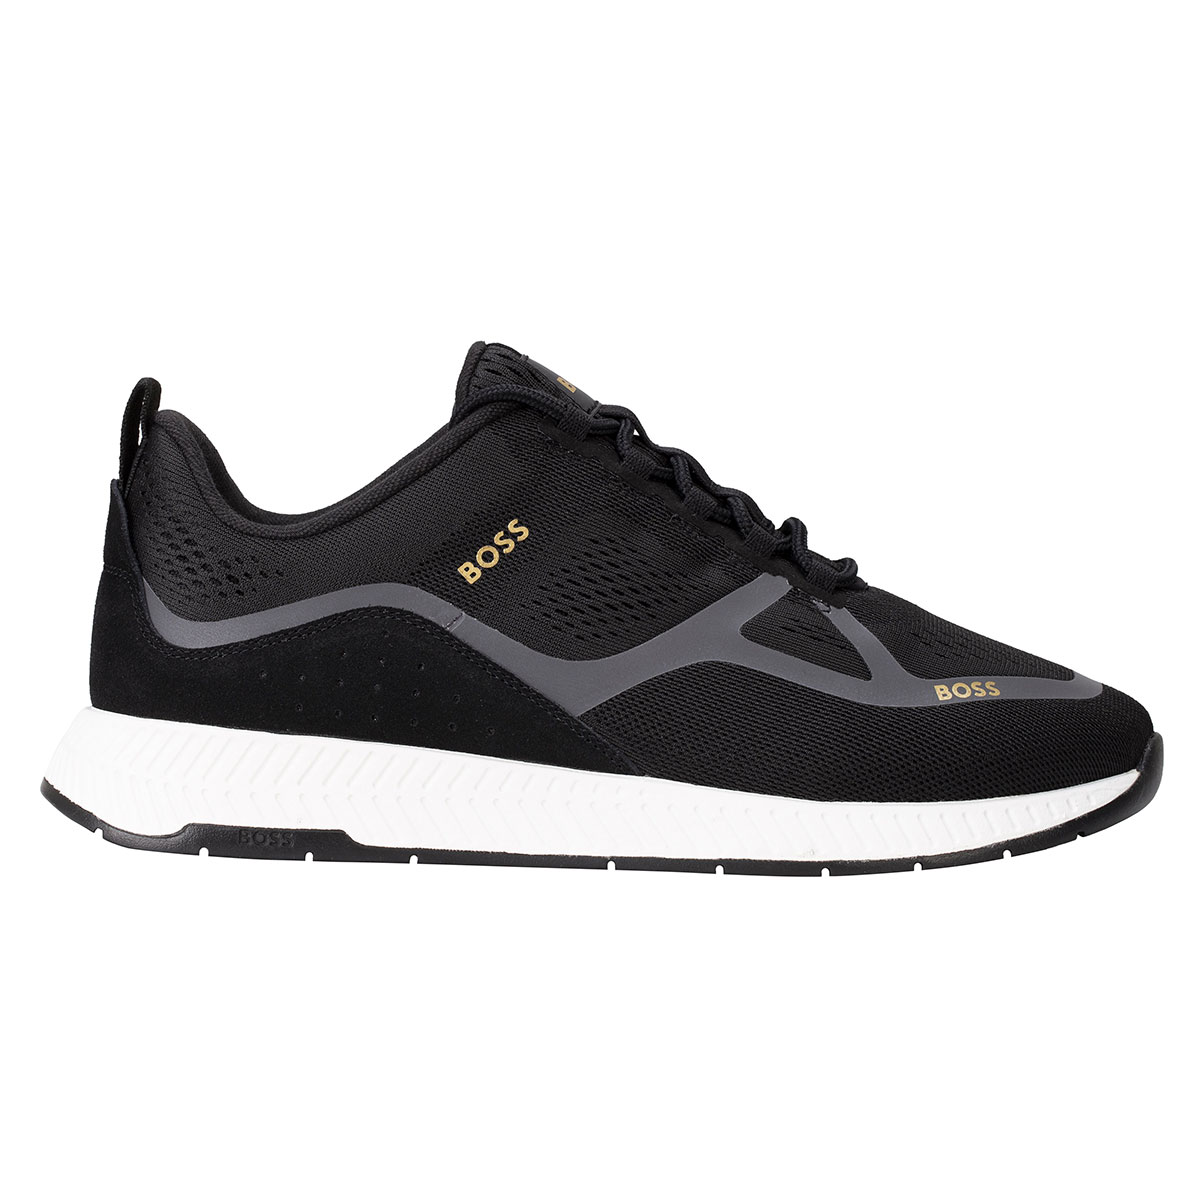 Mens Boss Trainers | House of Fraser